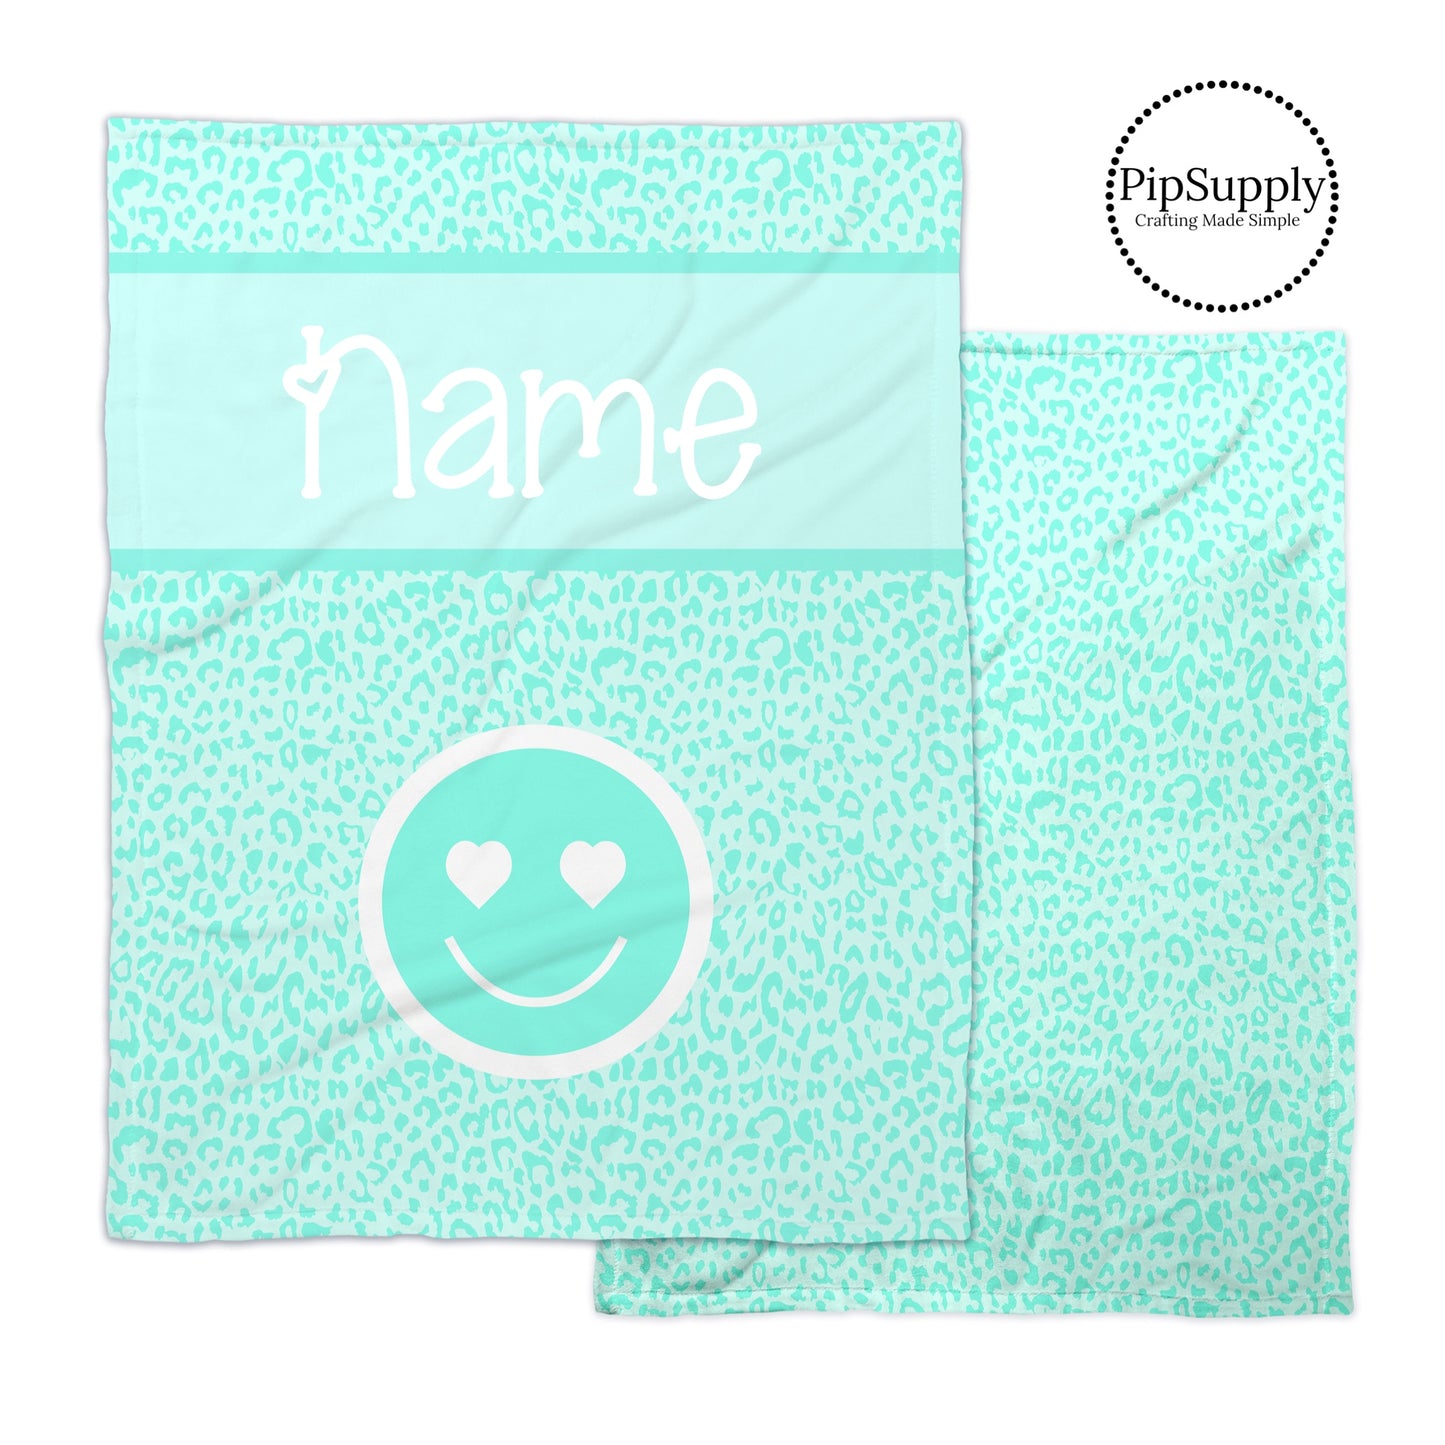 Light aqua and aqua blue leopard print soft minky blanket with customizable text and matching smiley face.